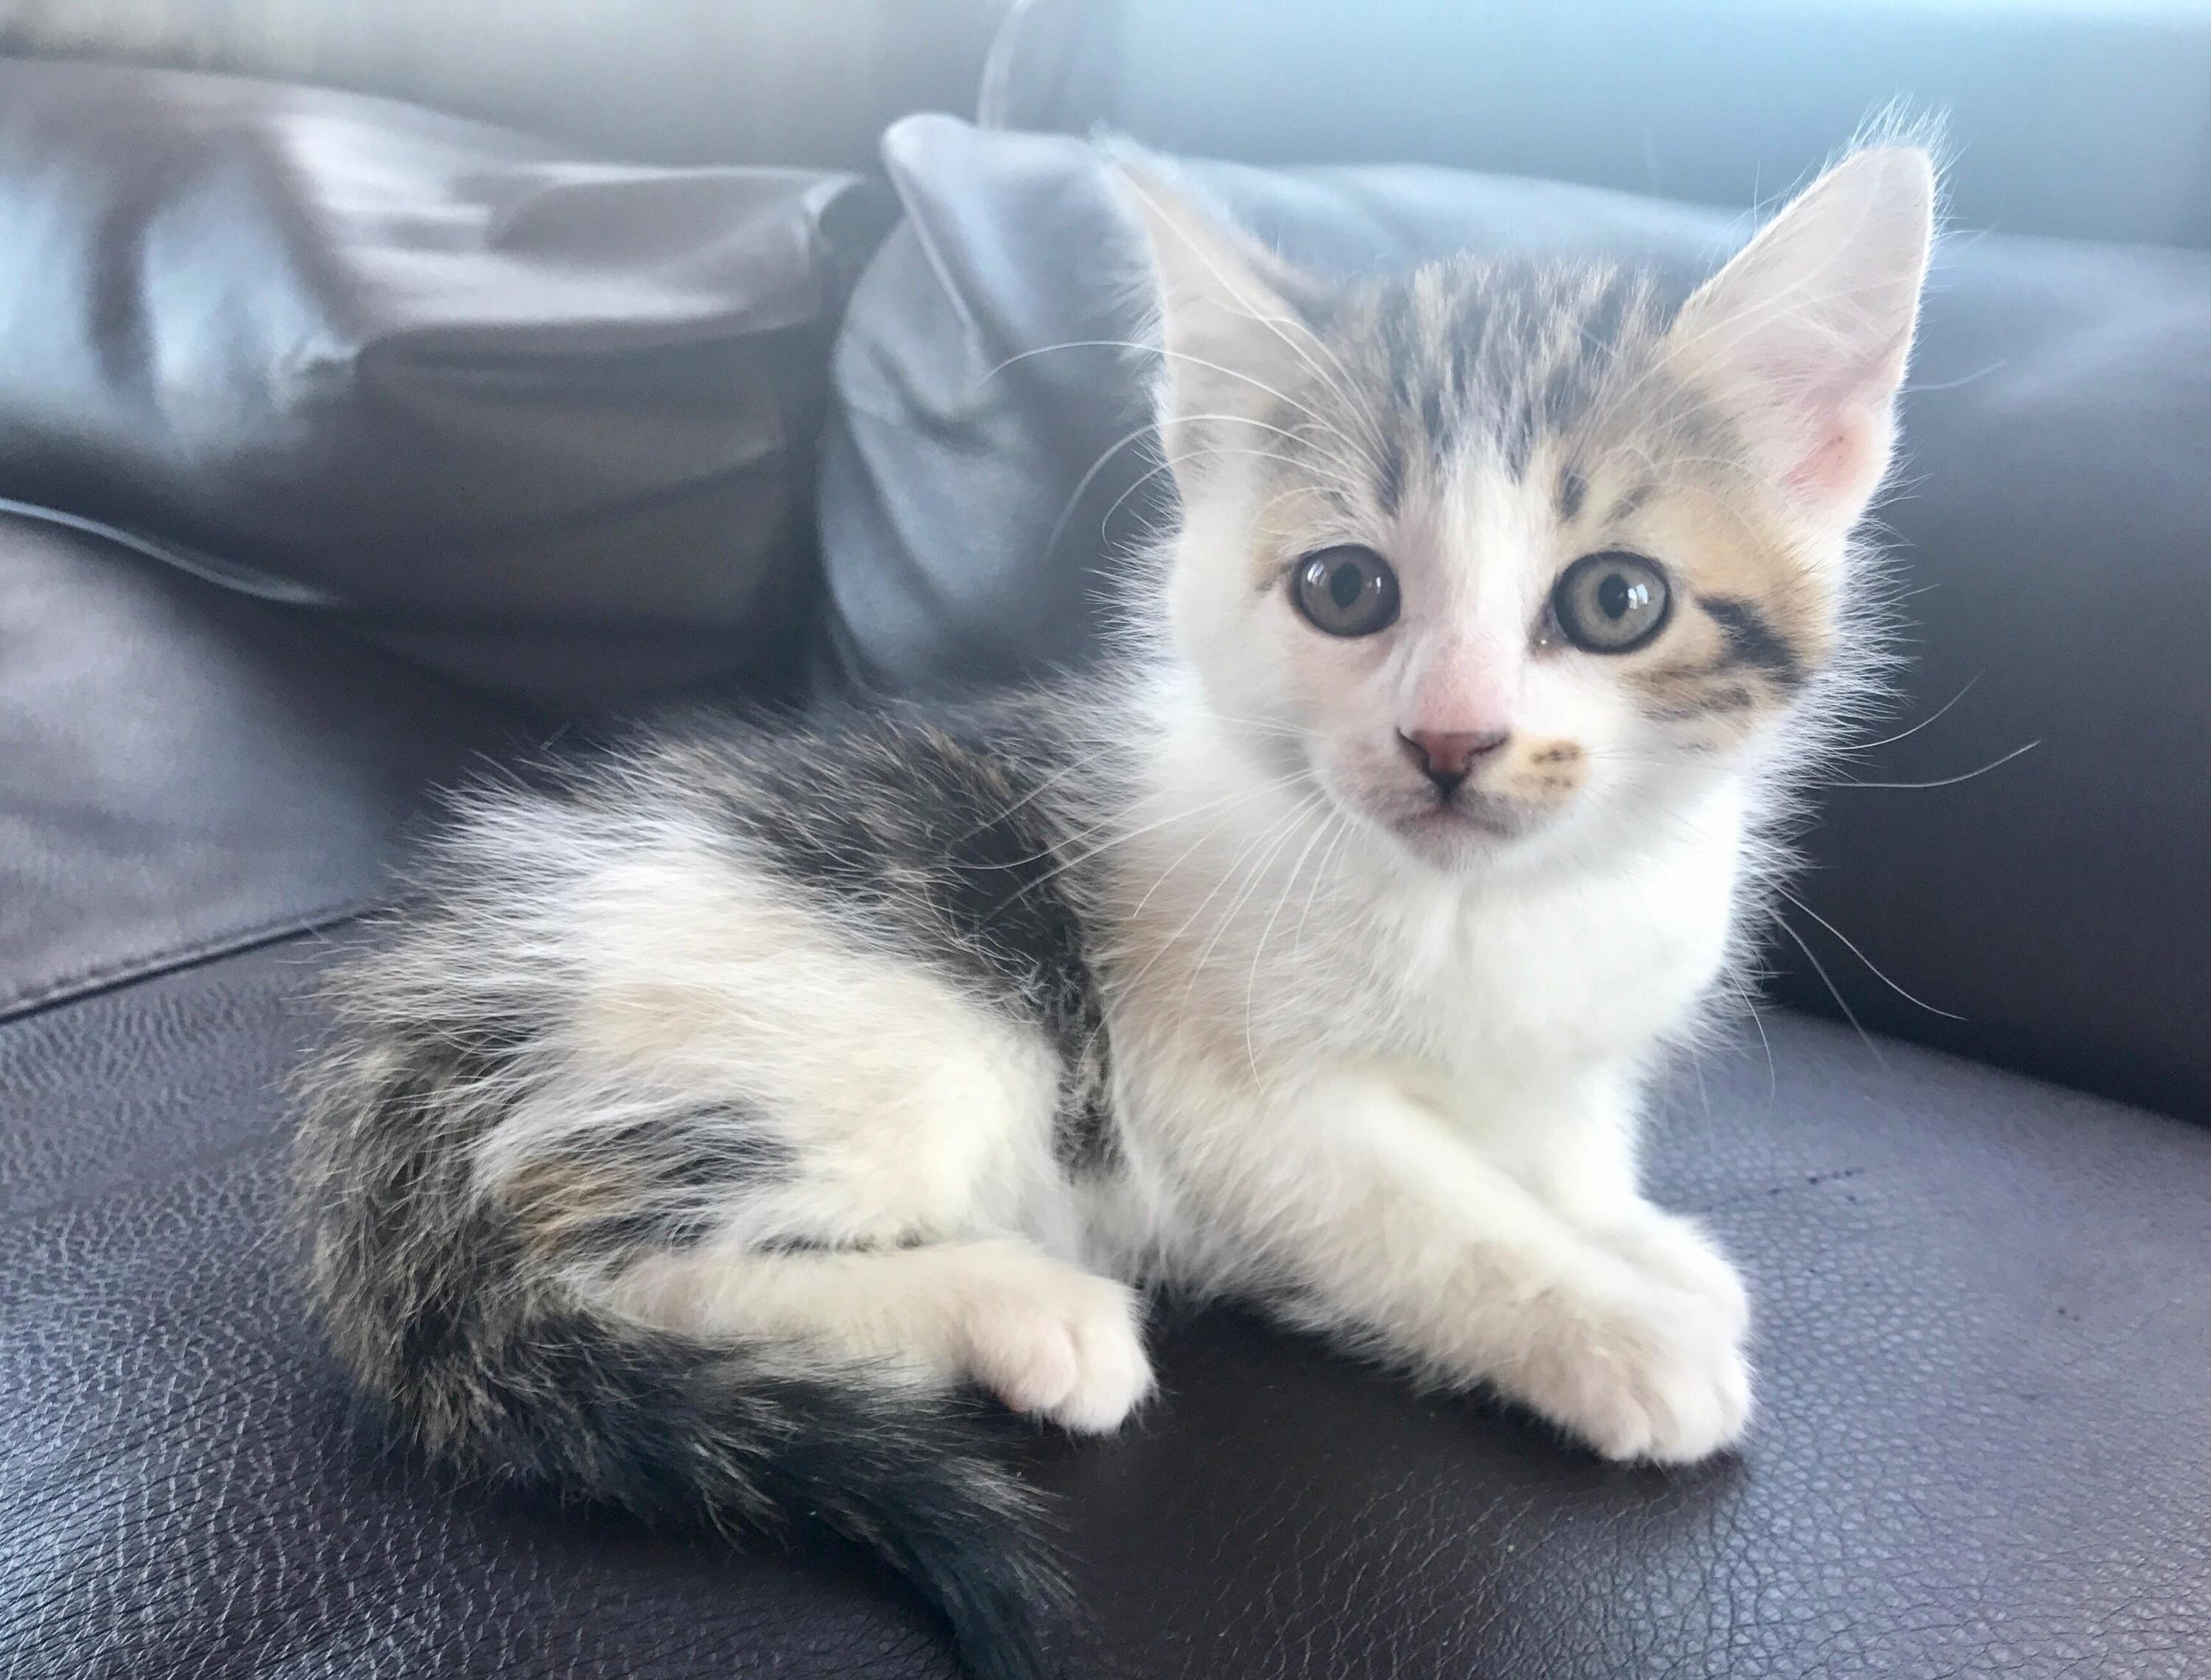 Becoming a first time cat owner tomorrow when i pick this 7 week old kitten up! advice and best wishes appreciated. so excited to join the rest of you cat owners!